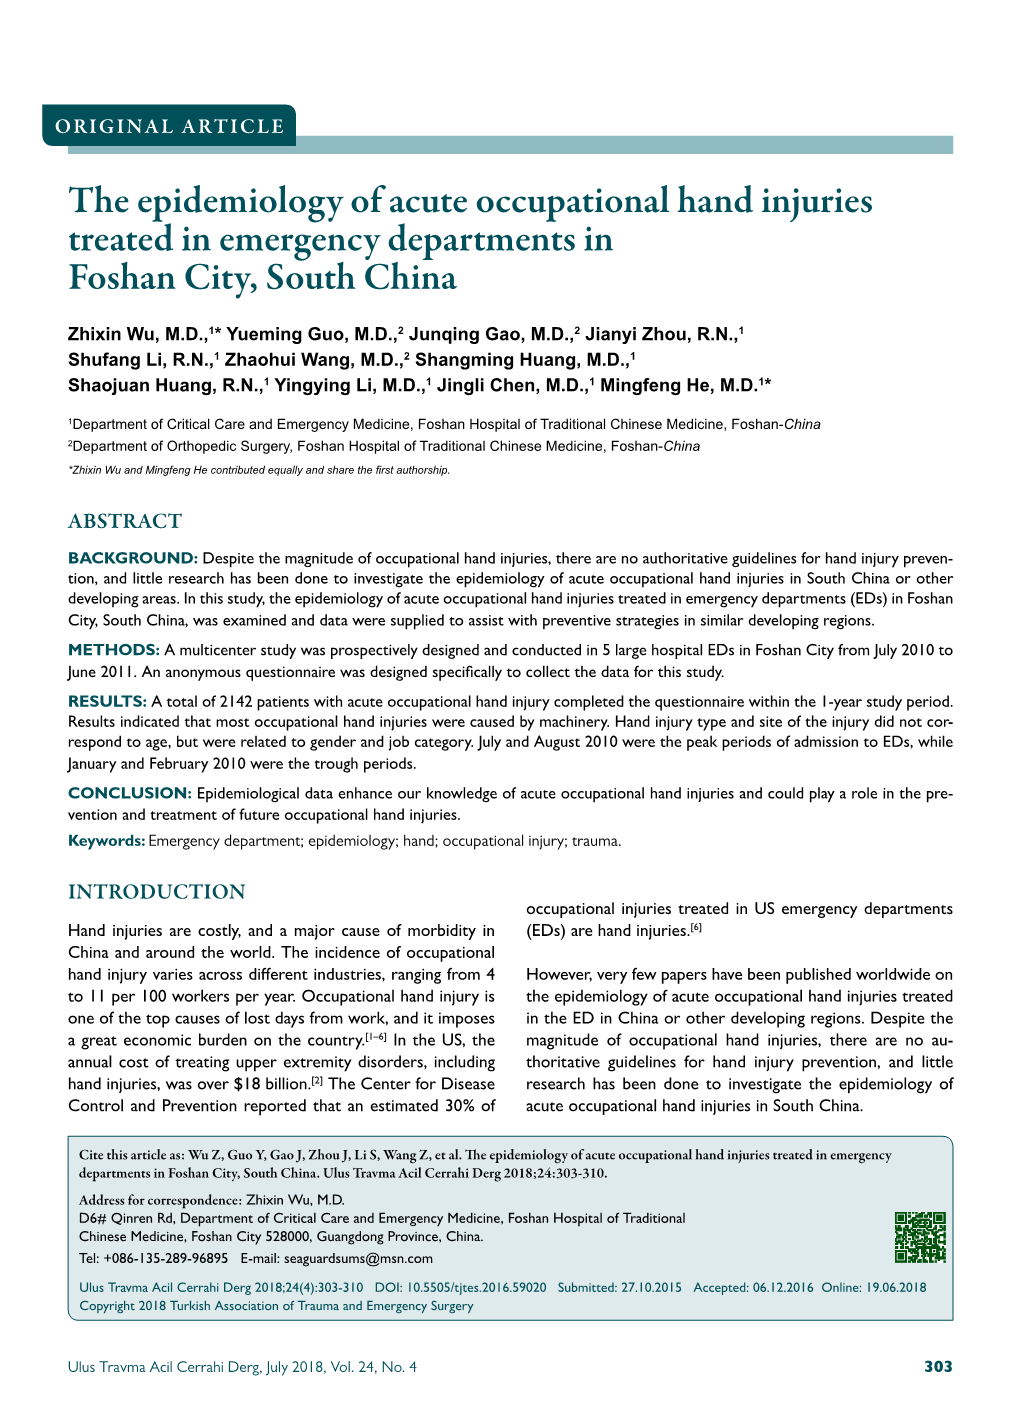 The Epidemiology of Acute Occupational Hand Injuries Treated in Emergency Departments in Foshan City, South China